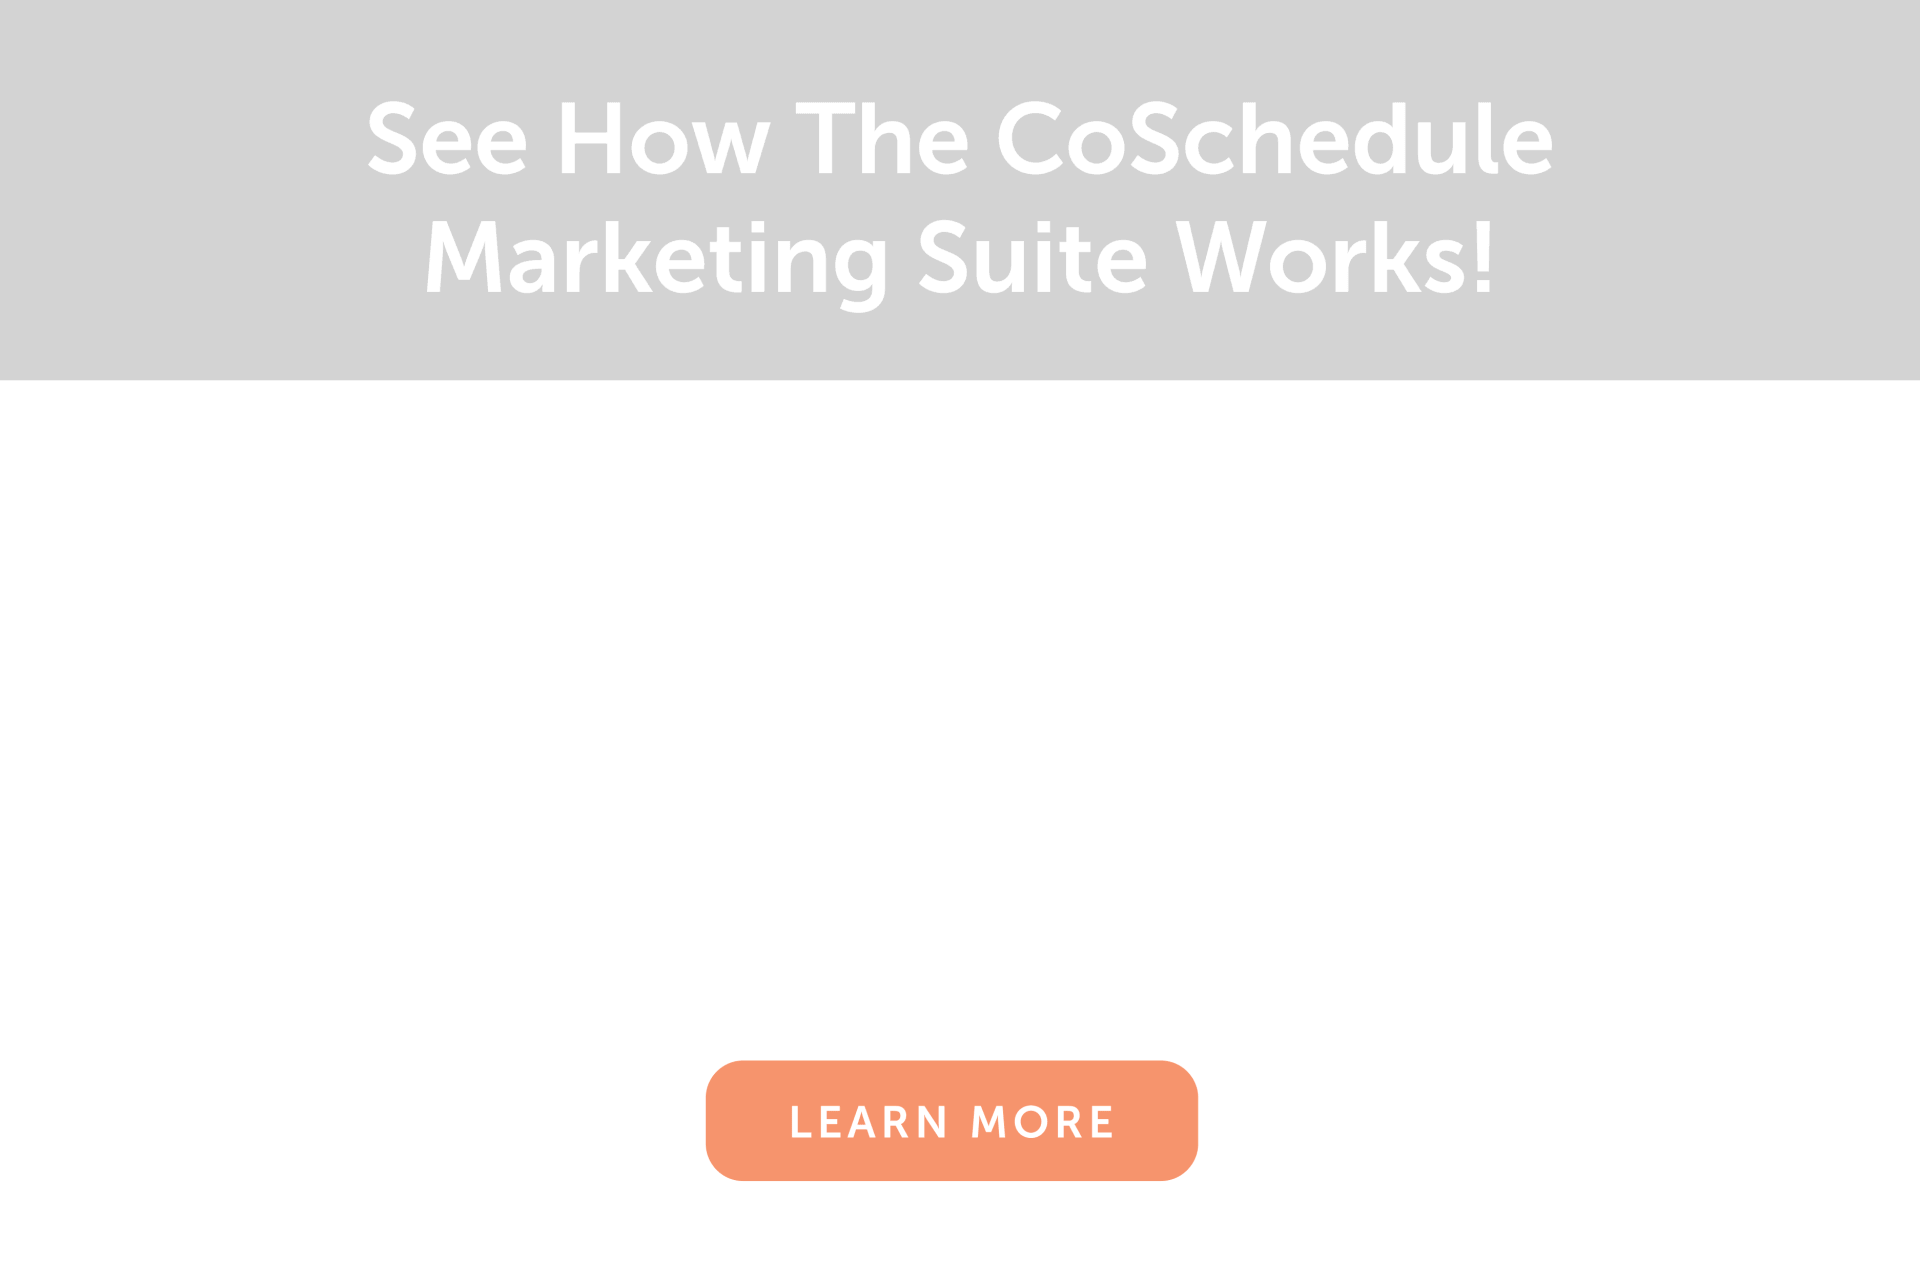 See the CoSchedule Marketing Suite